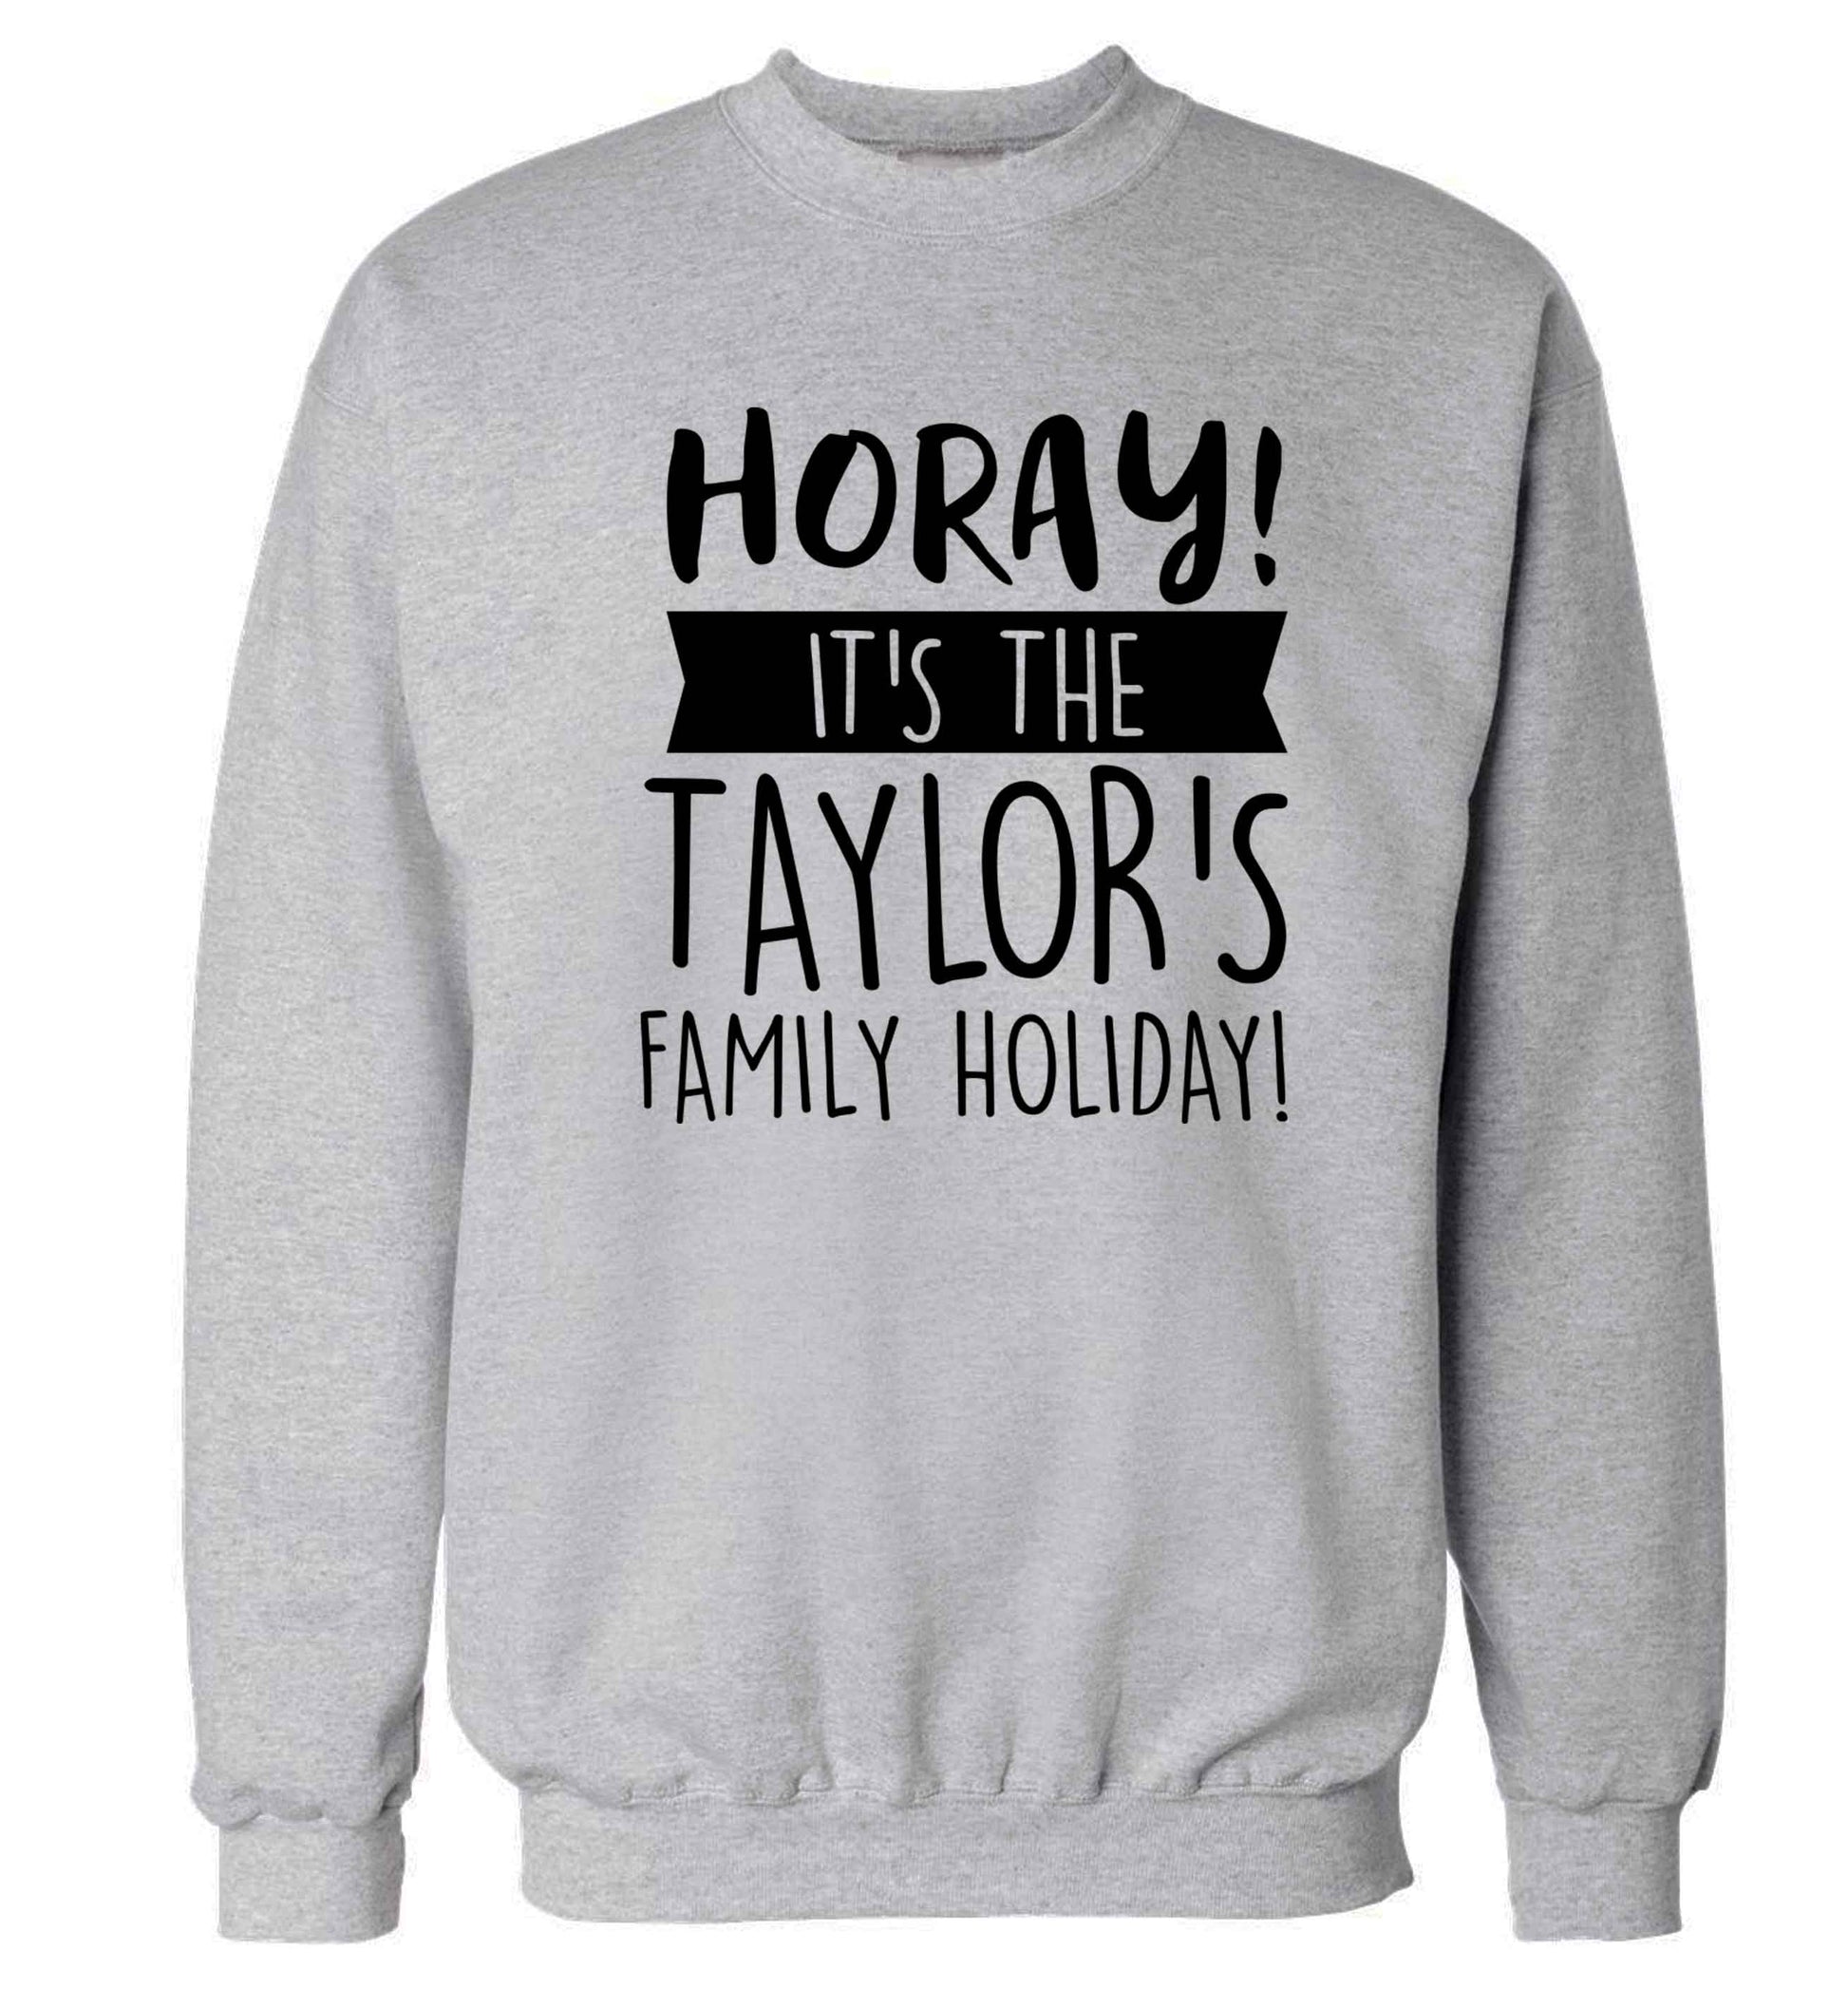 Horay it's the Taylor's family holiday! personalised item Adult's unisex grey Sweater 2XL